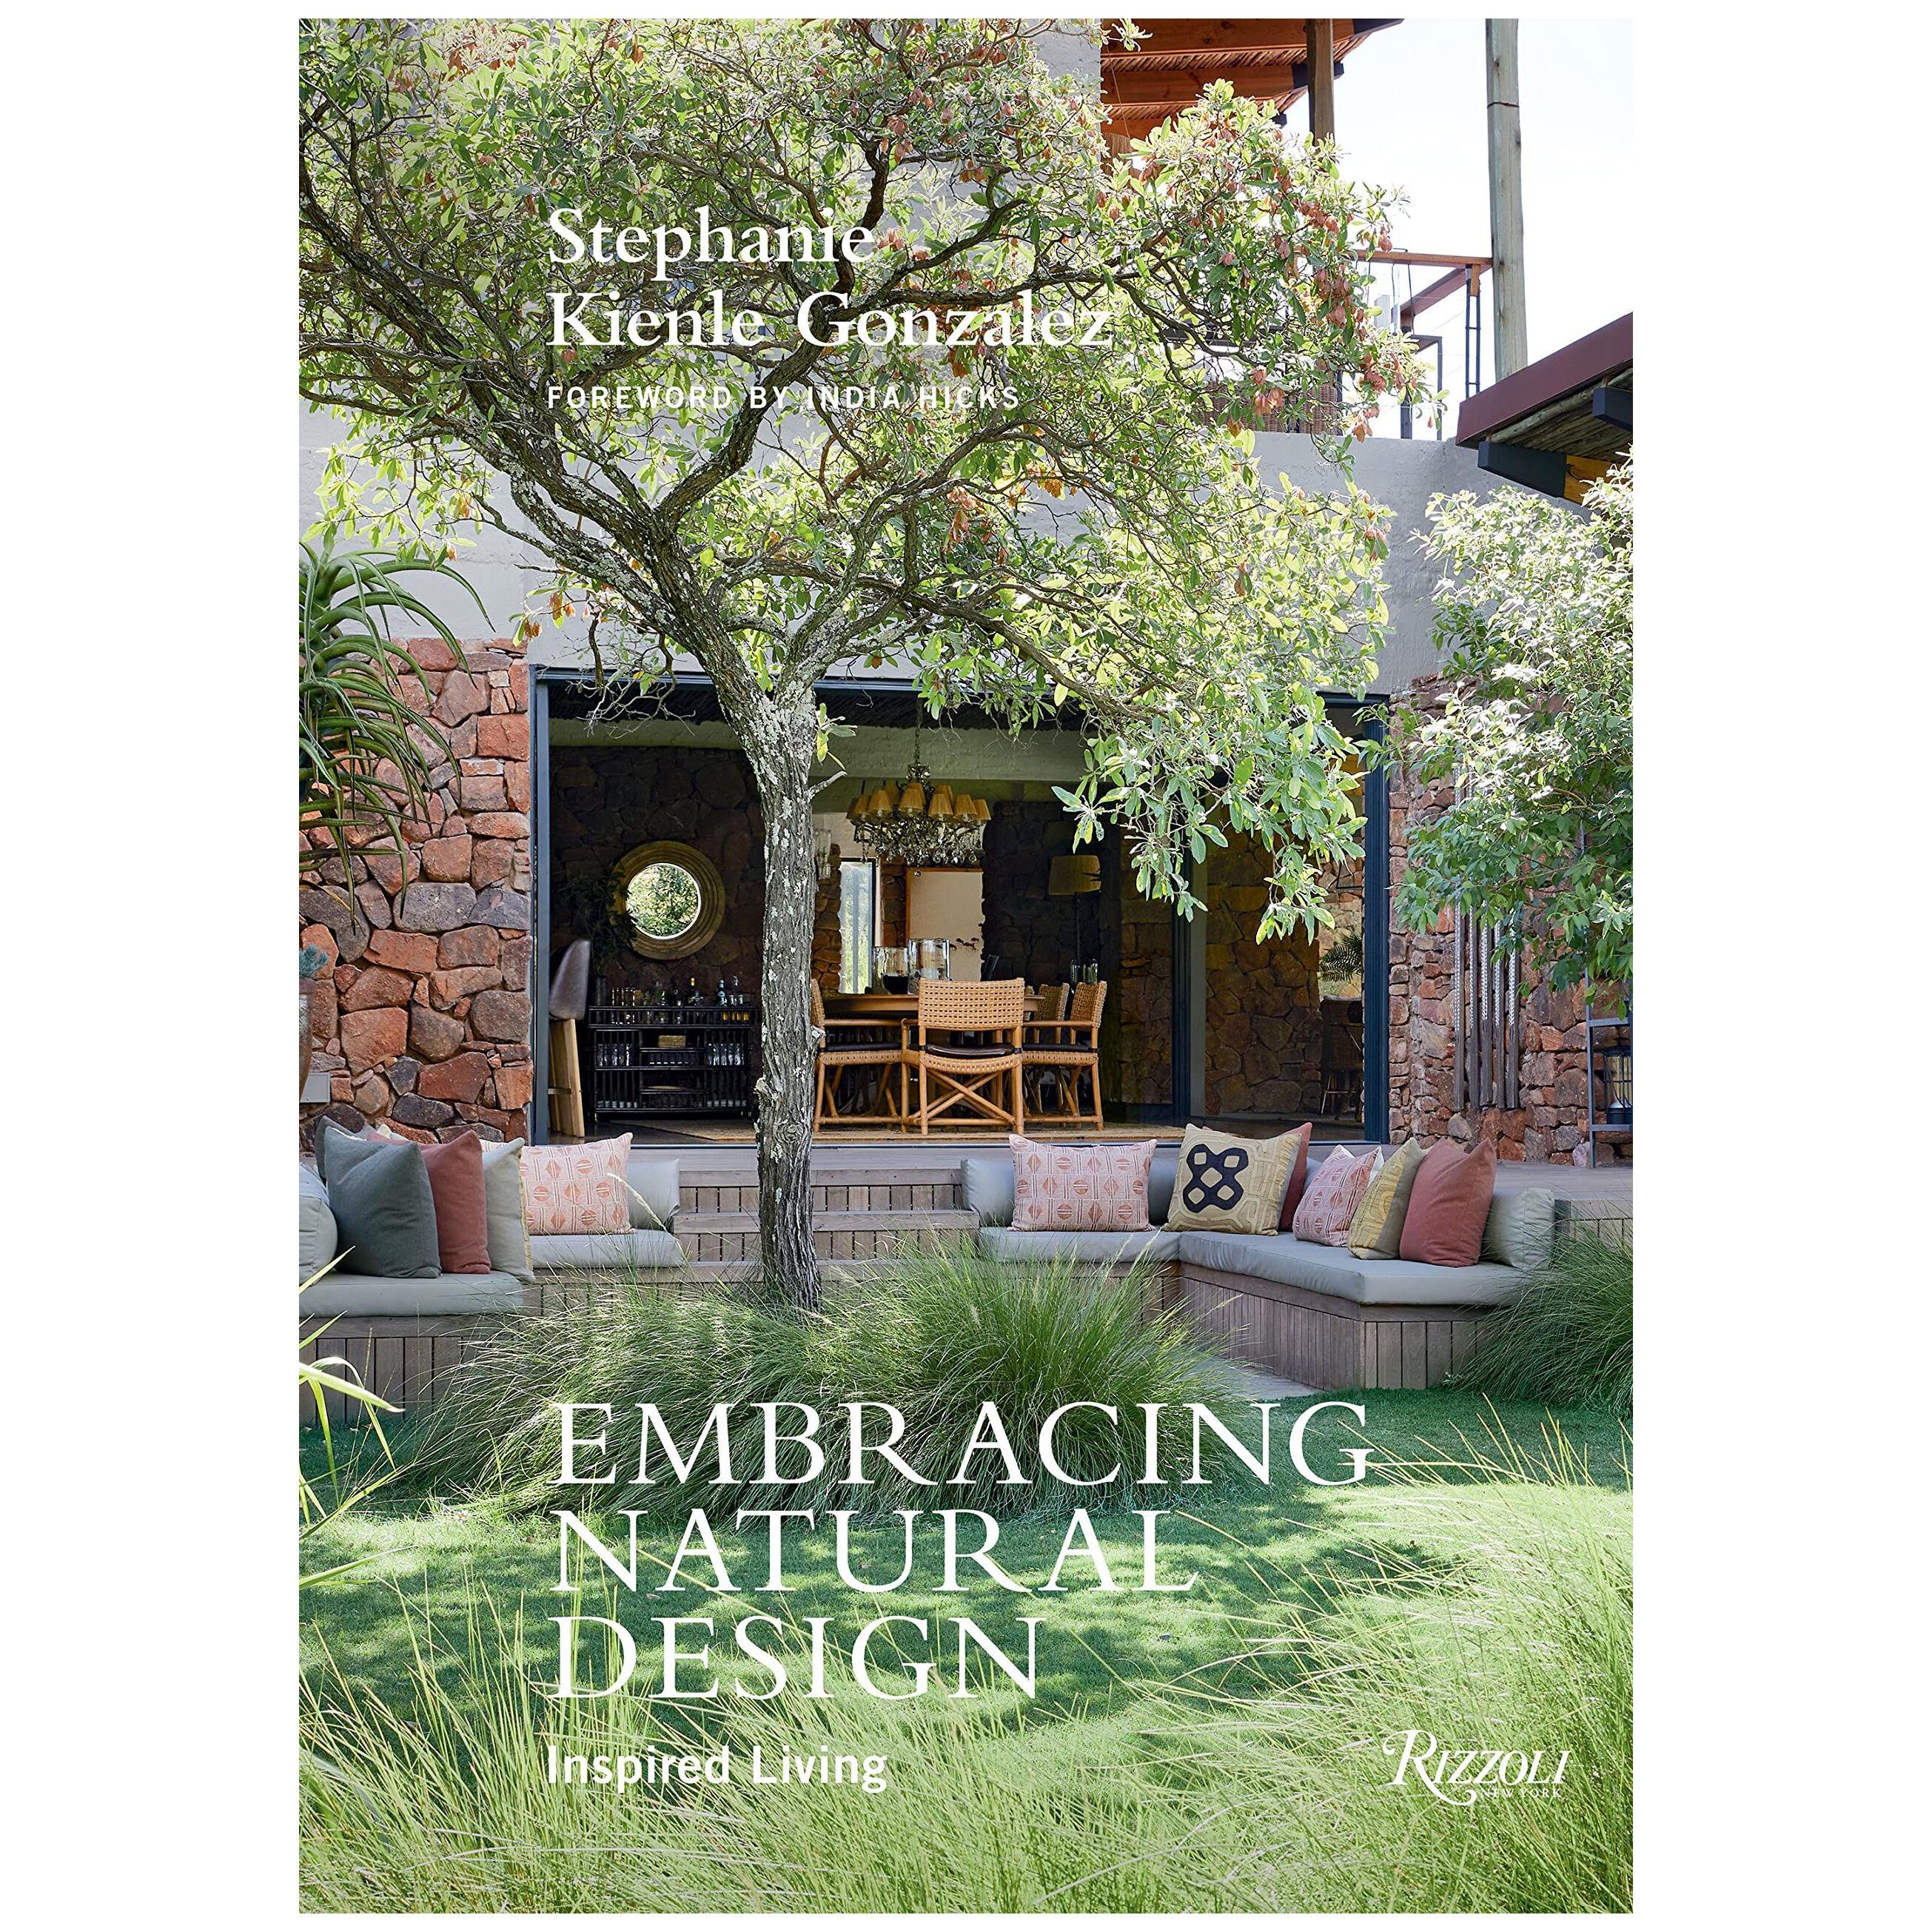 Embracing Natural Design: Inspired Living by Stephanie Kienle Gonzalez (Book)